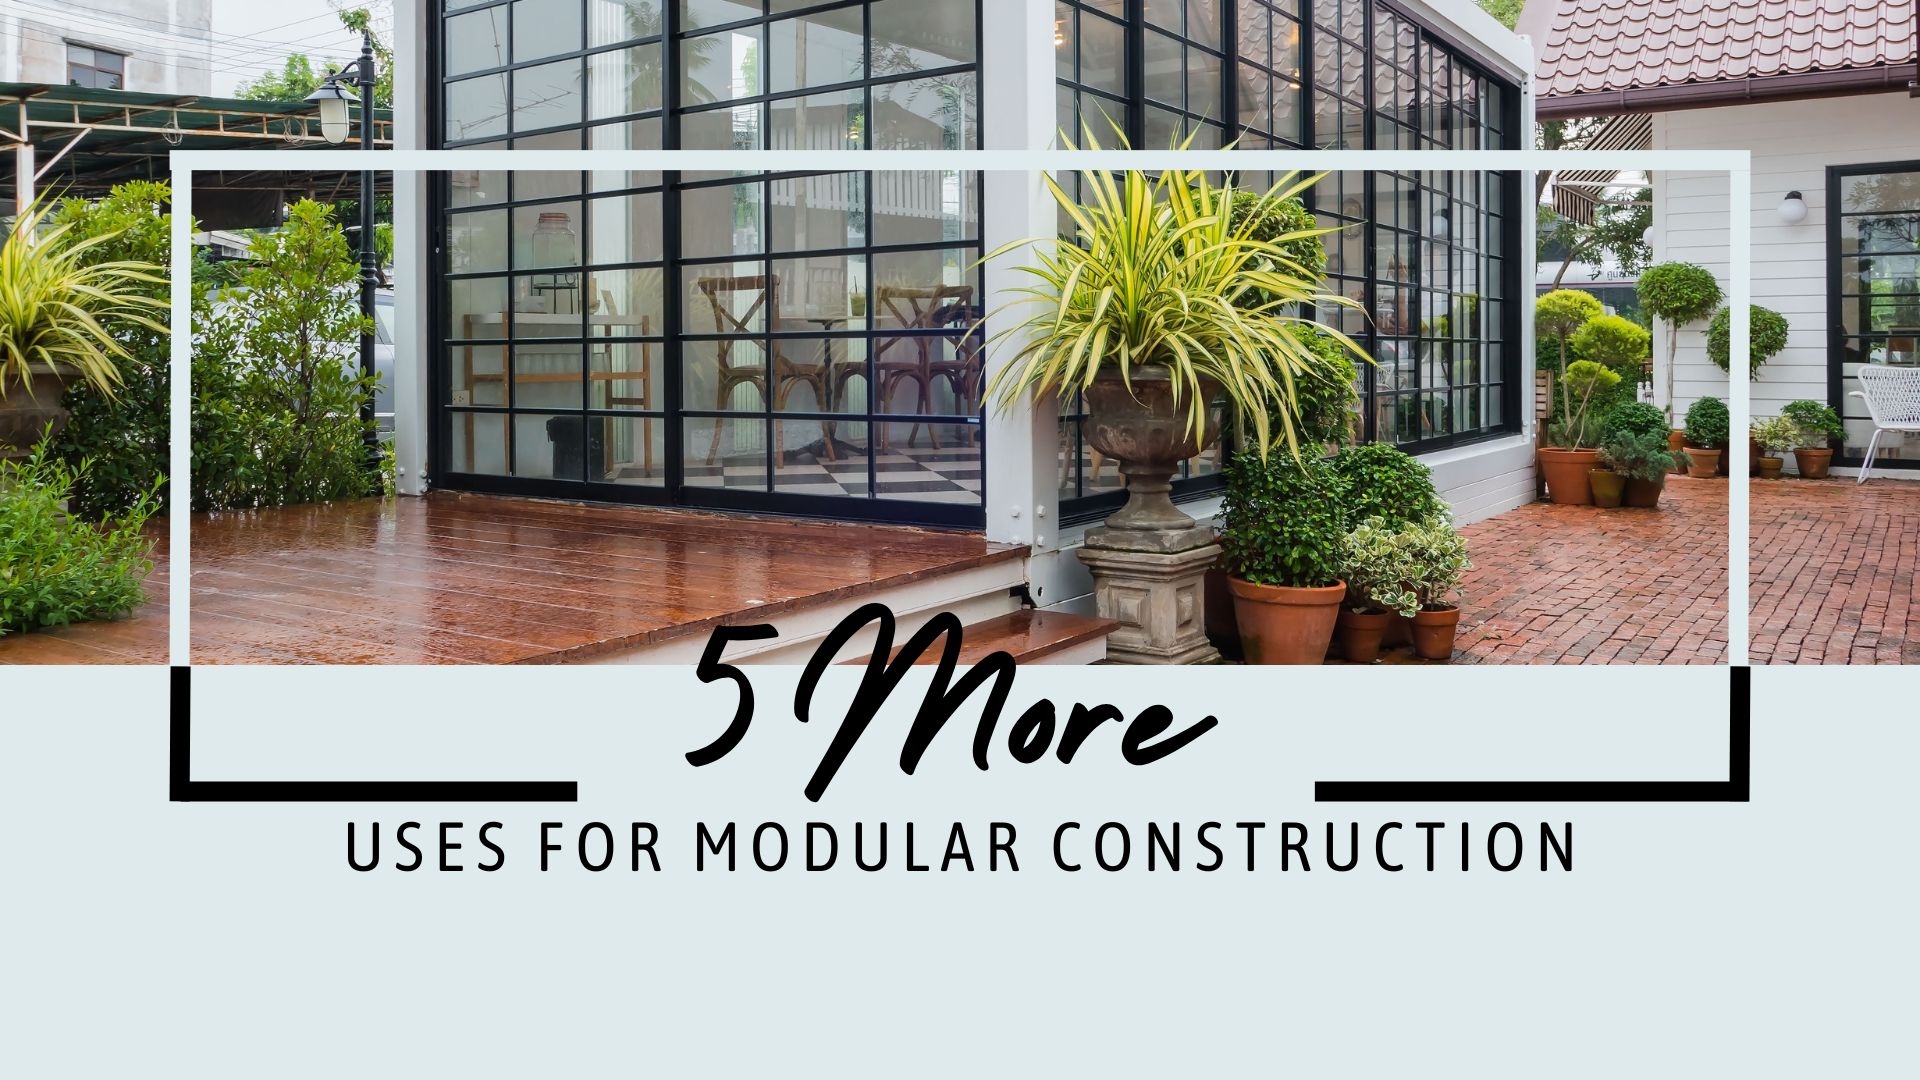 5 more uses for modular construction